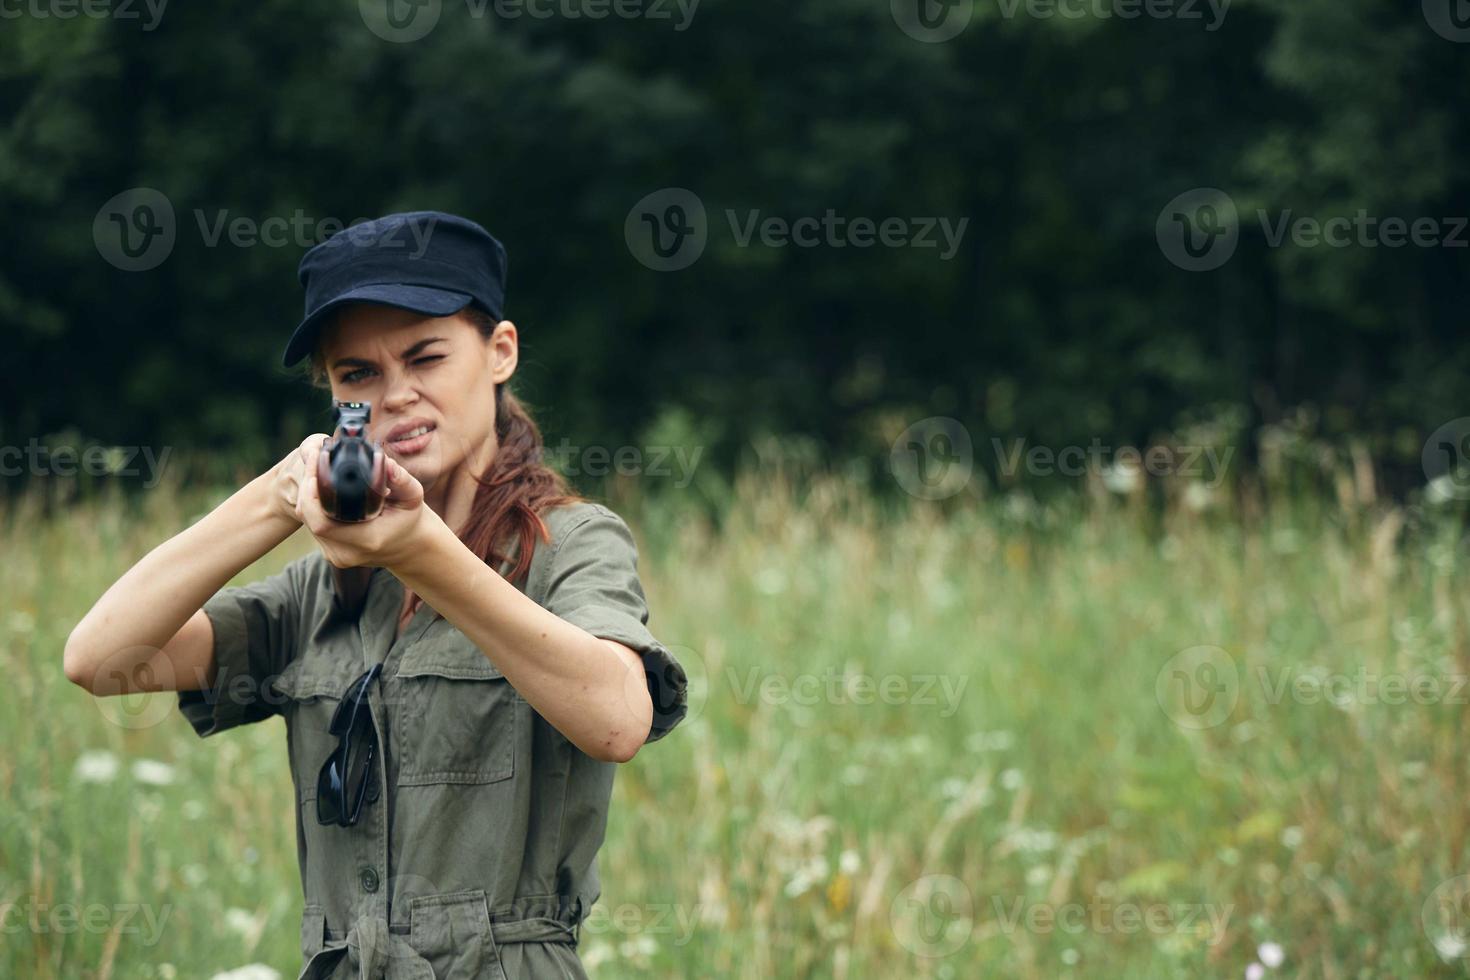 Military woman aiming forward with a weapon lifestyle black cap photo